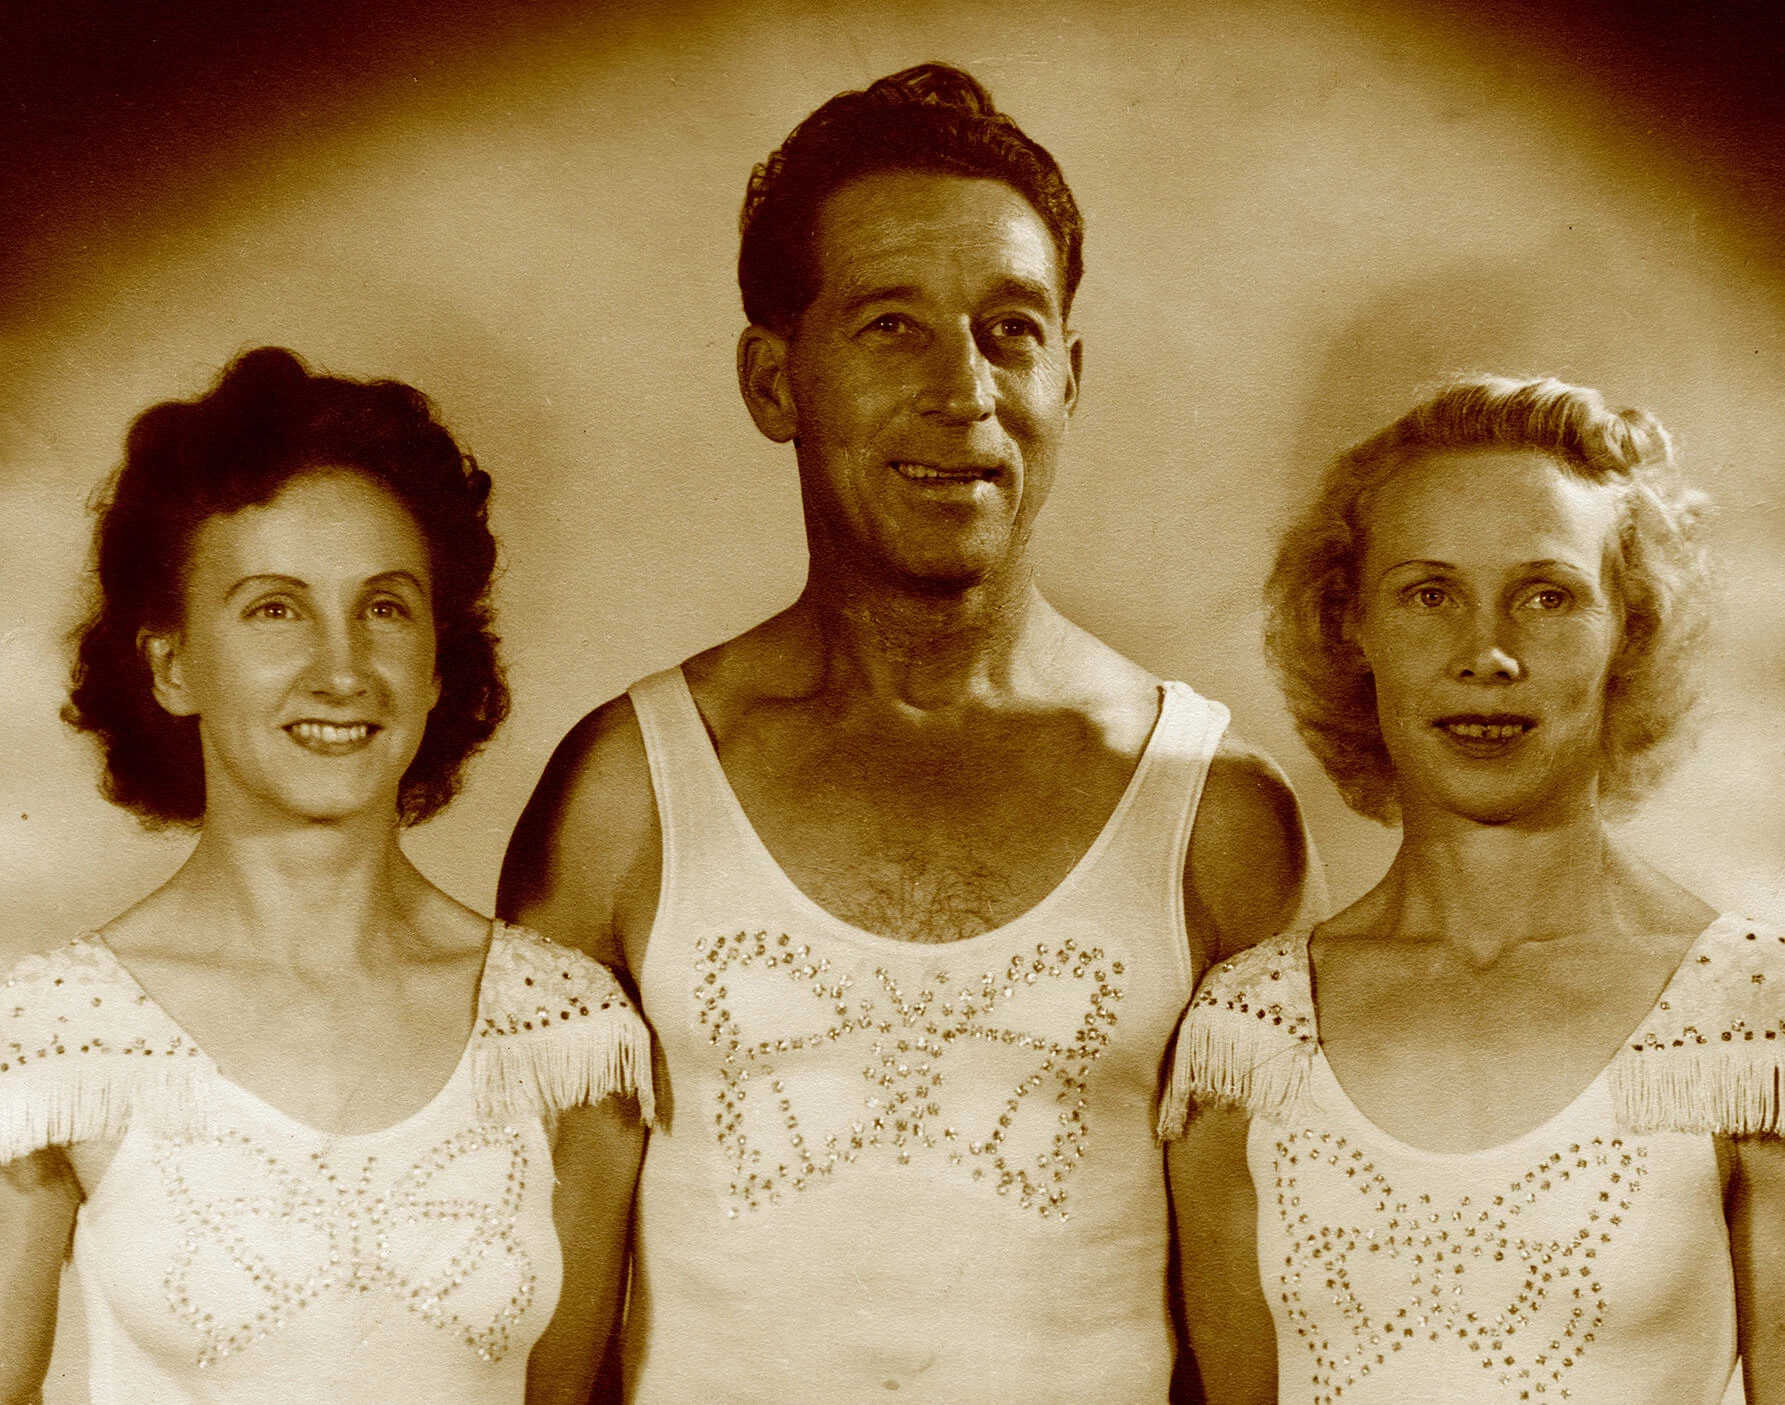 Portrait of two women on either side of one man. The woman on the left has short dark hair, the man has short dark hair, and the woman on the right has short light hair. They are all smiling and looking to the right of the camera. They are wearing matching outifts, white skin tight fabric with a butterfly shape in sequins on the chest. The ladies have a fringe detail on the shoulder.